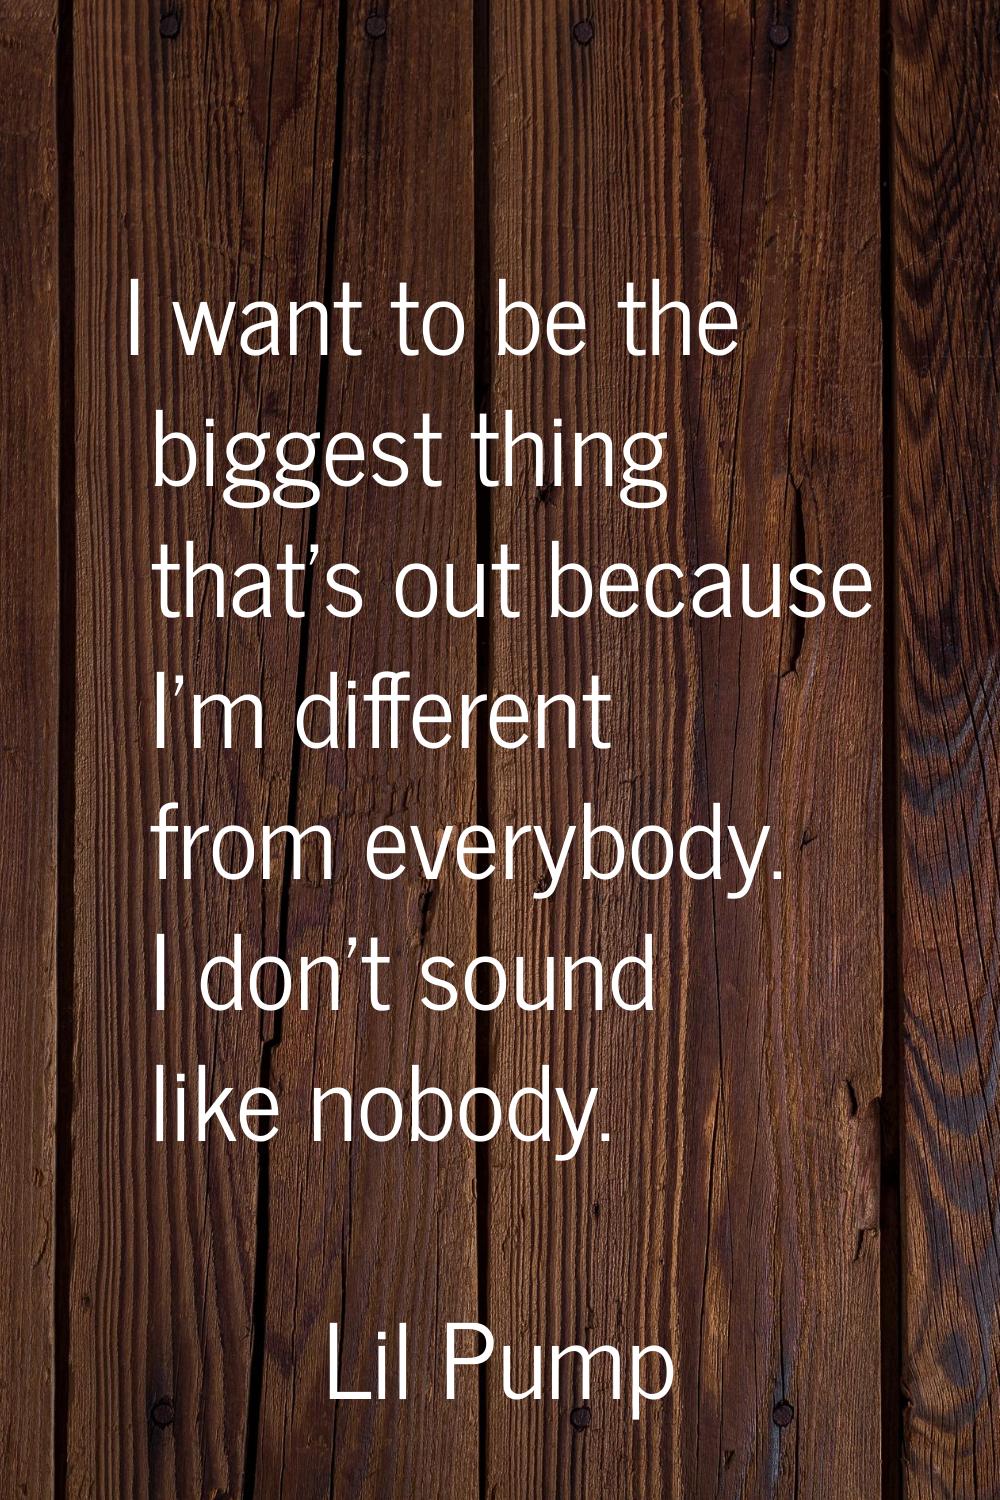 I want to be the biggest thing that's out because I'm different from everybody. I don't sound like 